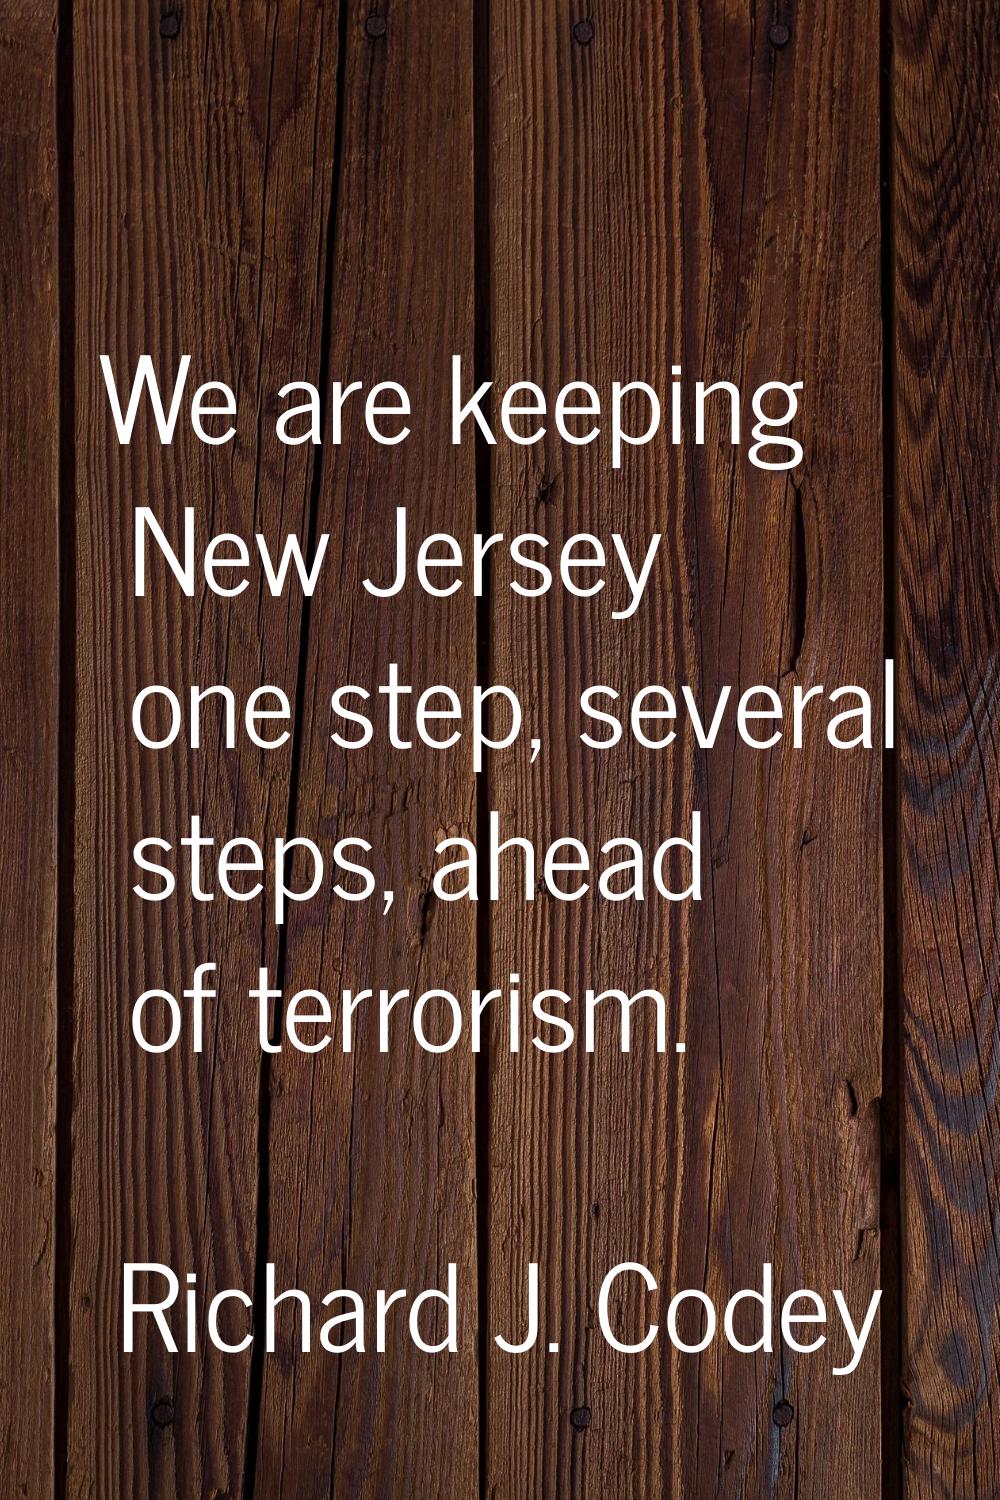 We are keeping New Jersey one step, several steps, ahead of terrorism.